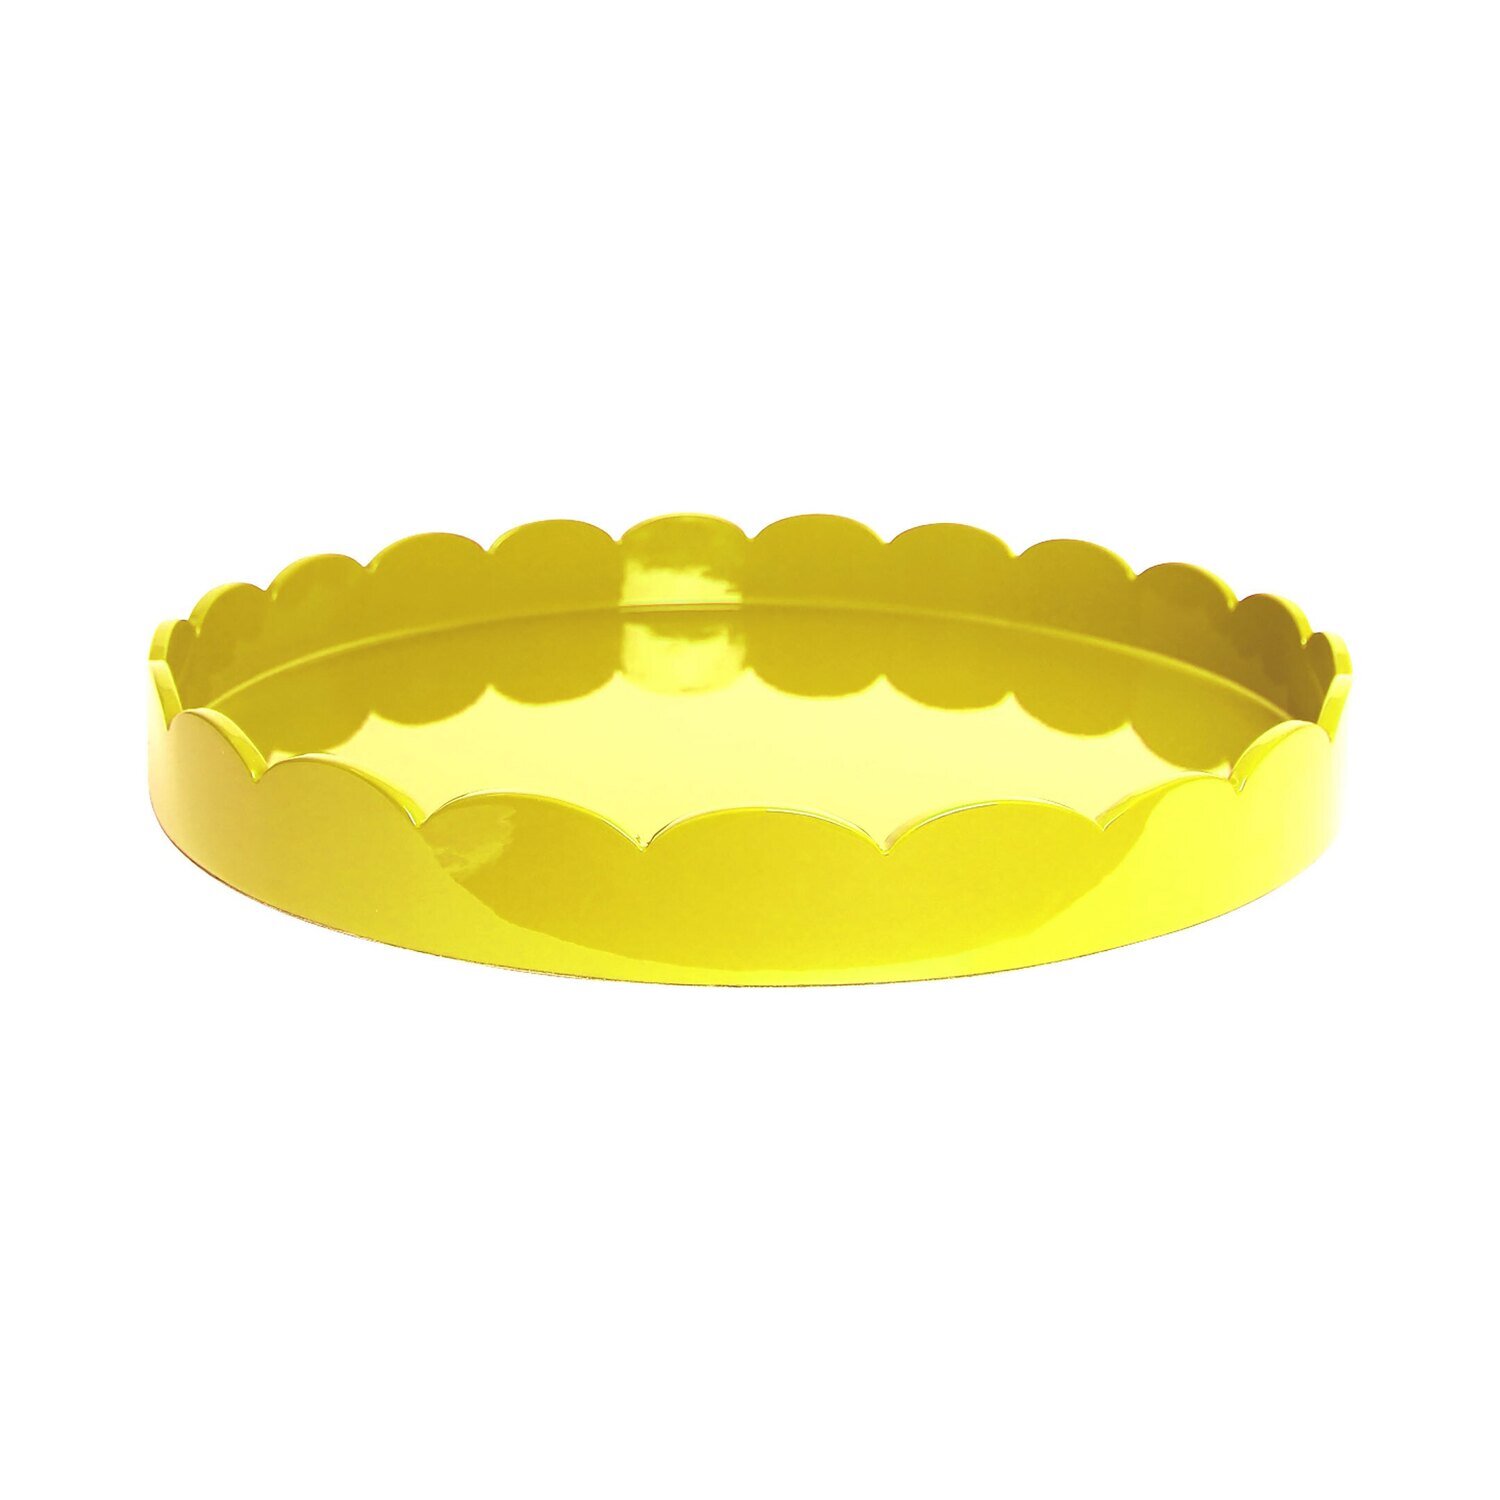 Addison Ross Yellow Round Medium Lacquered Scallop Tray 16 x 16 Inch Lacquer TR7004